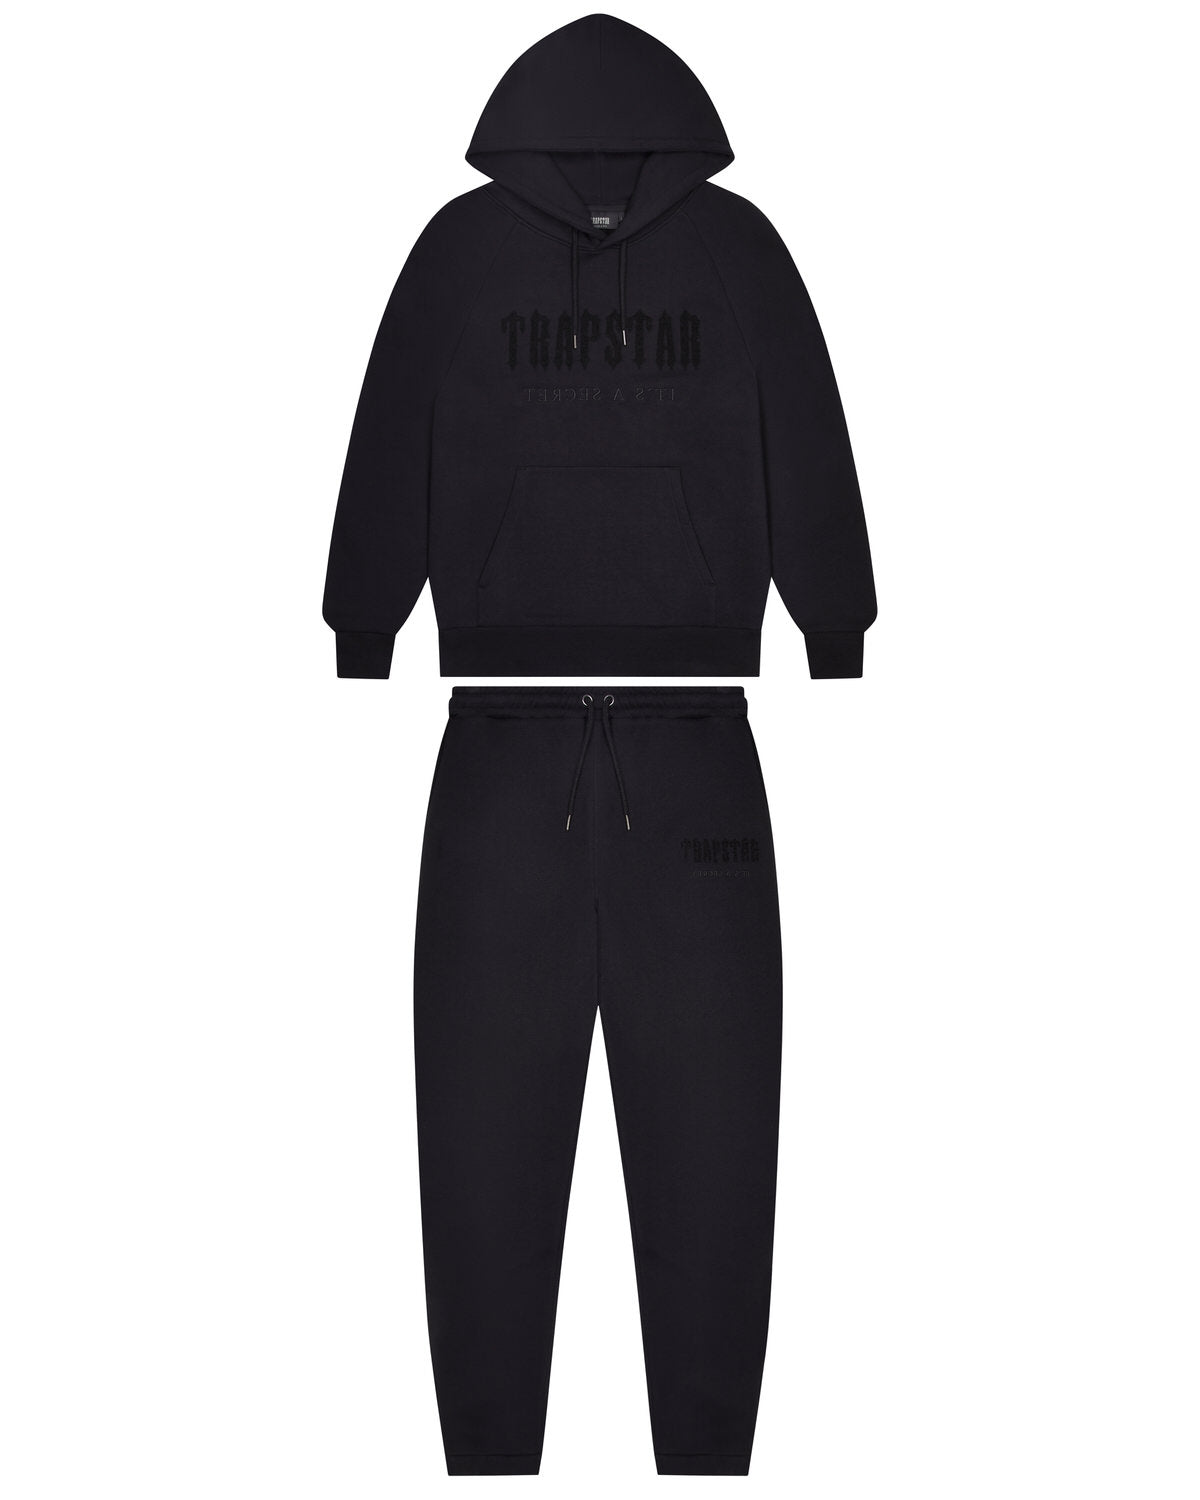 Chenille Decoded Jogger - Blackout